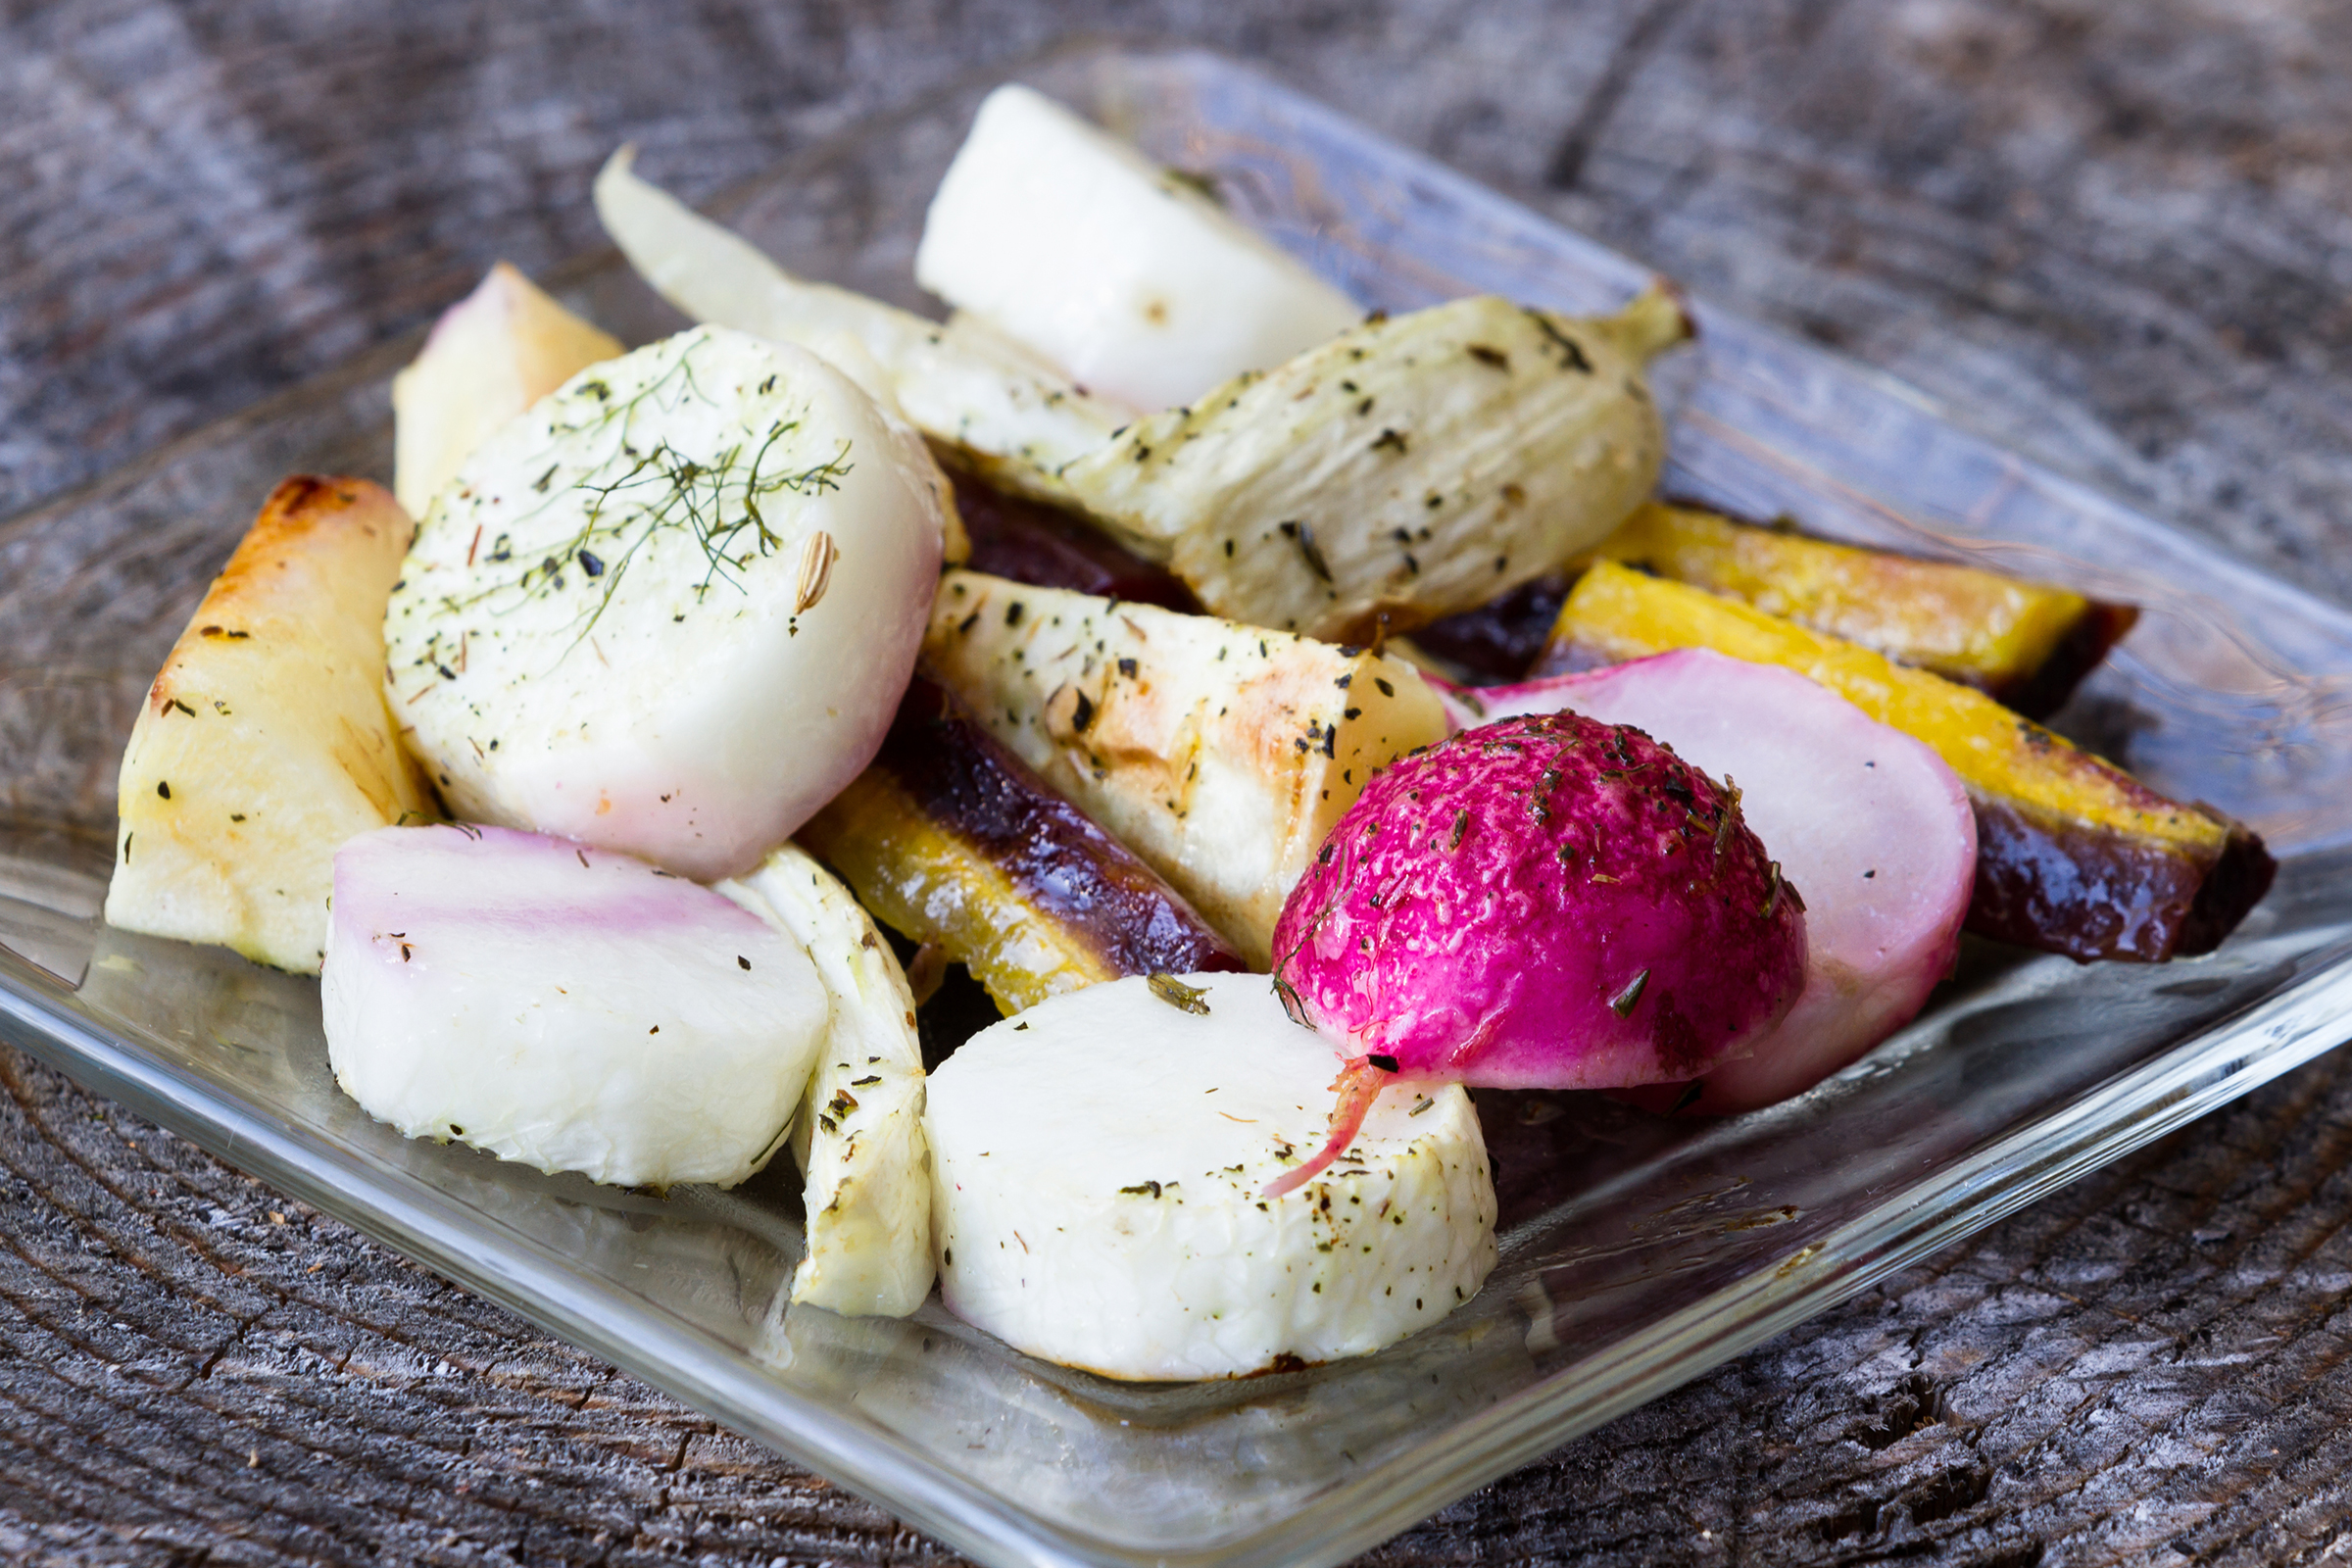 WEB-ROOT-VEGETABLES-BEETS-ONIONS-ROASTED-Shutterstock-Wollertz